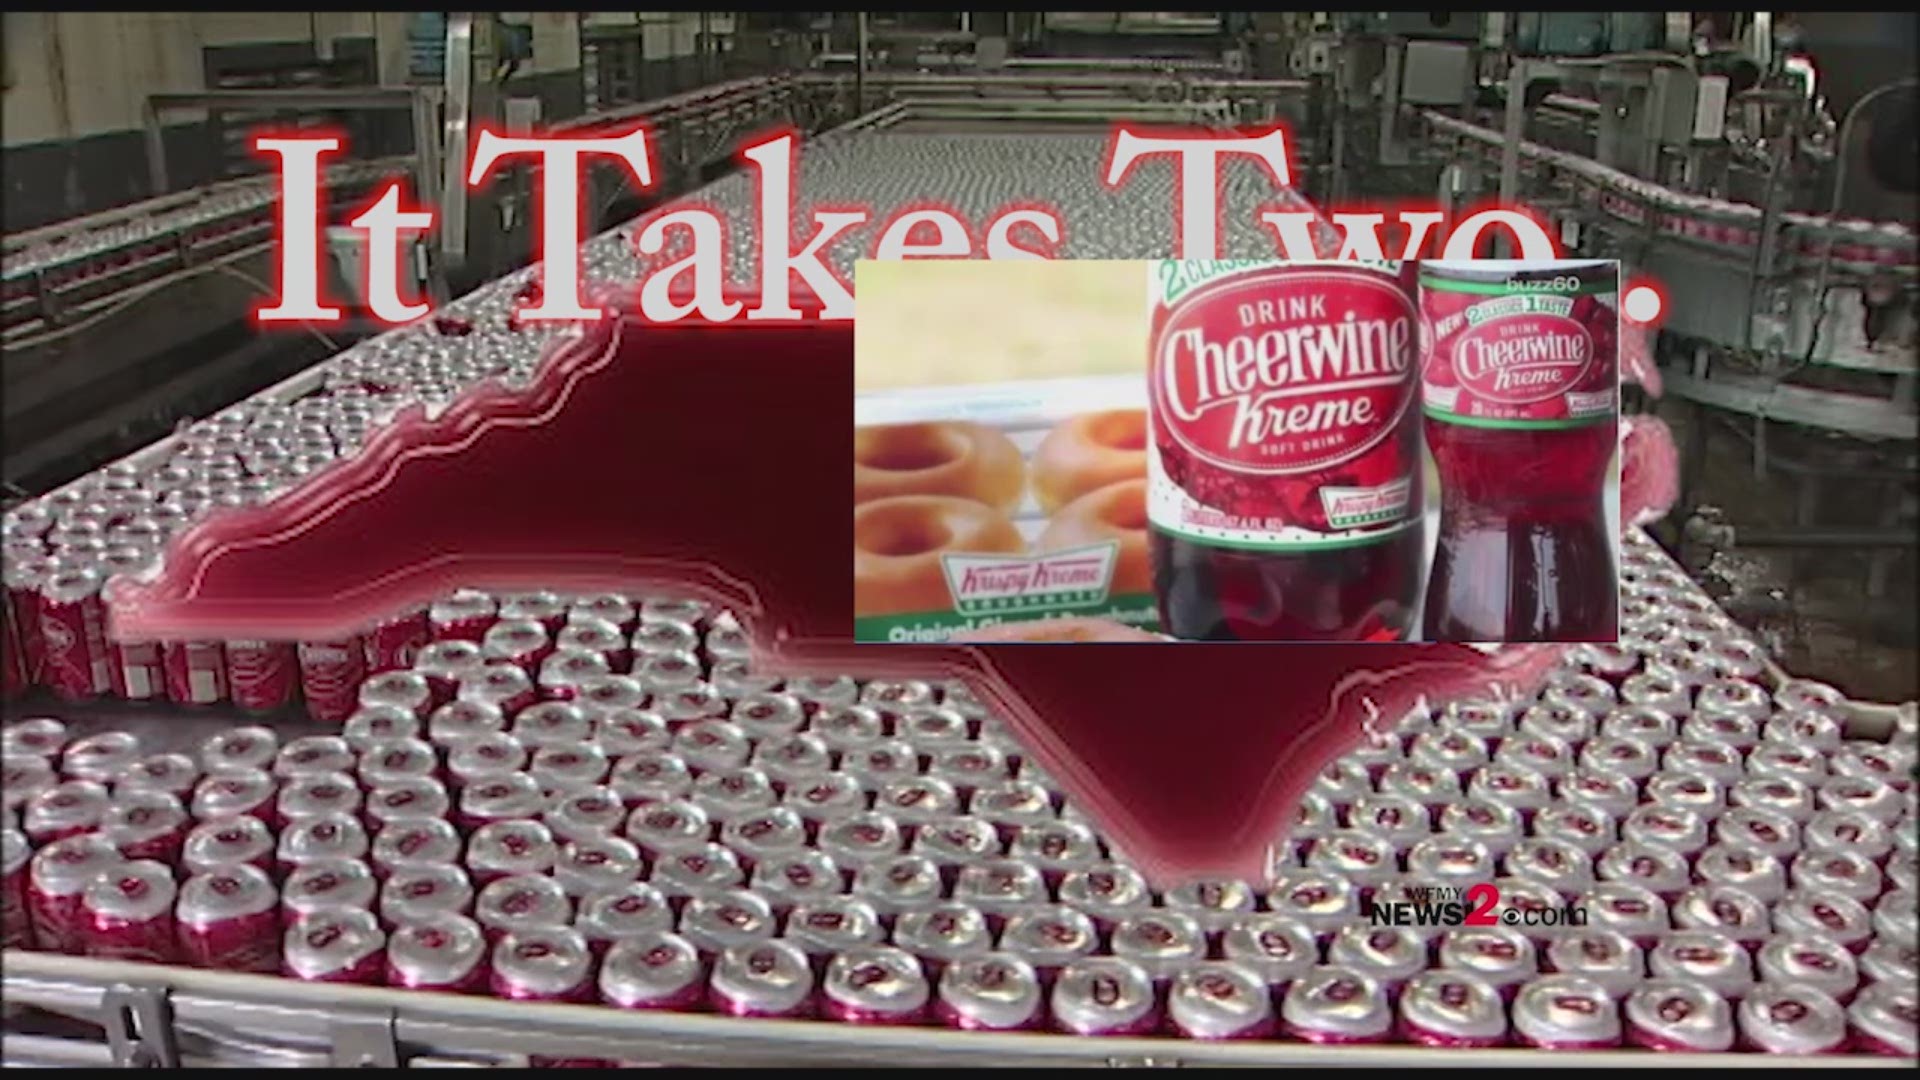 What You Don't Know About Cheerwine